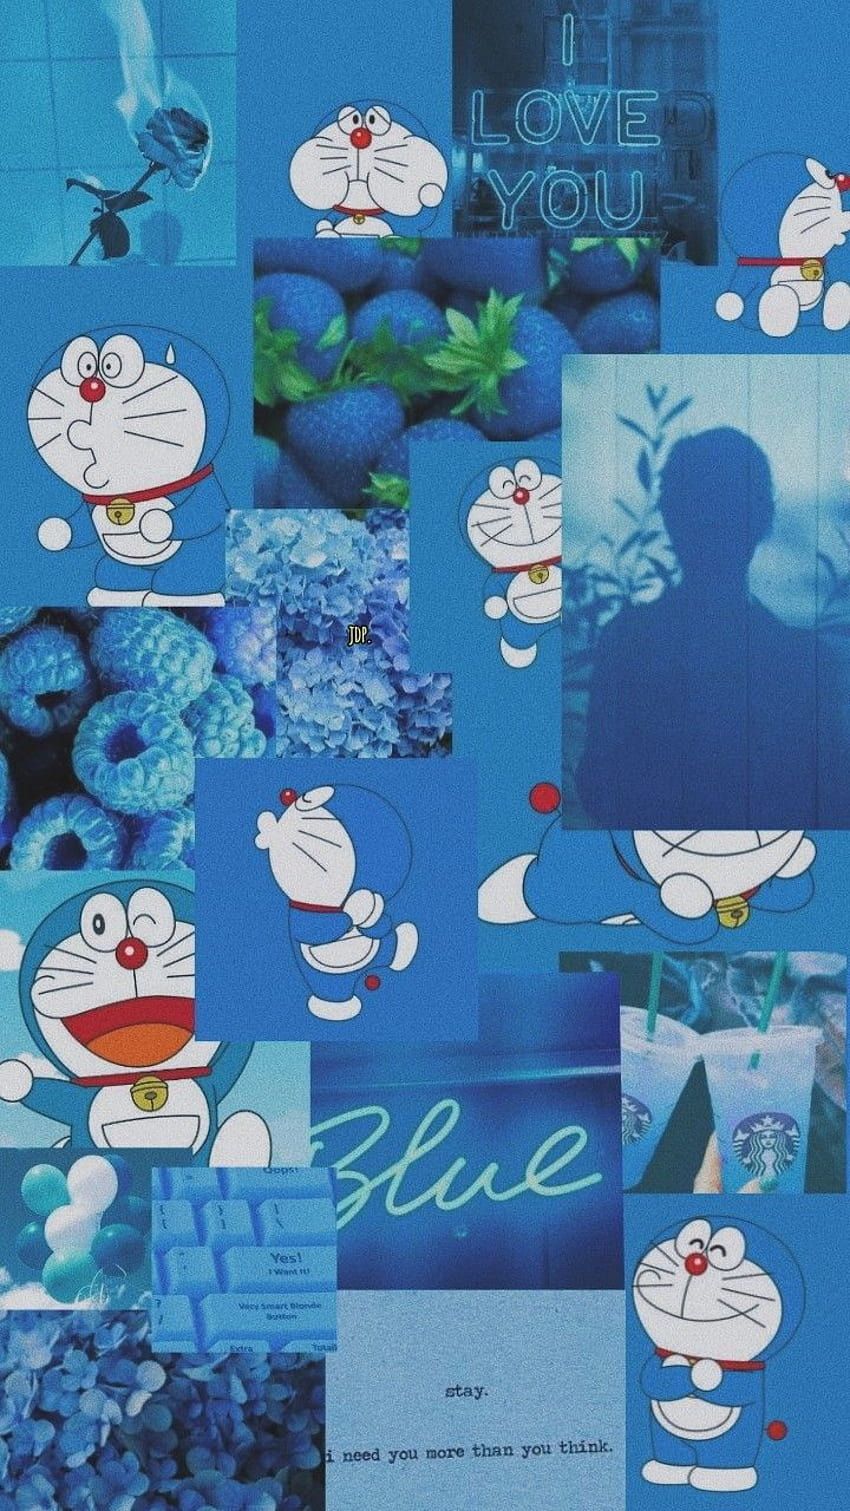 A collage of various cartoon characters on blue background - Blue, Doraemon